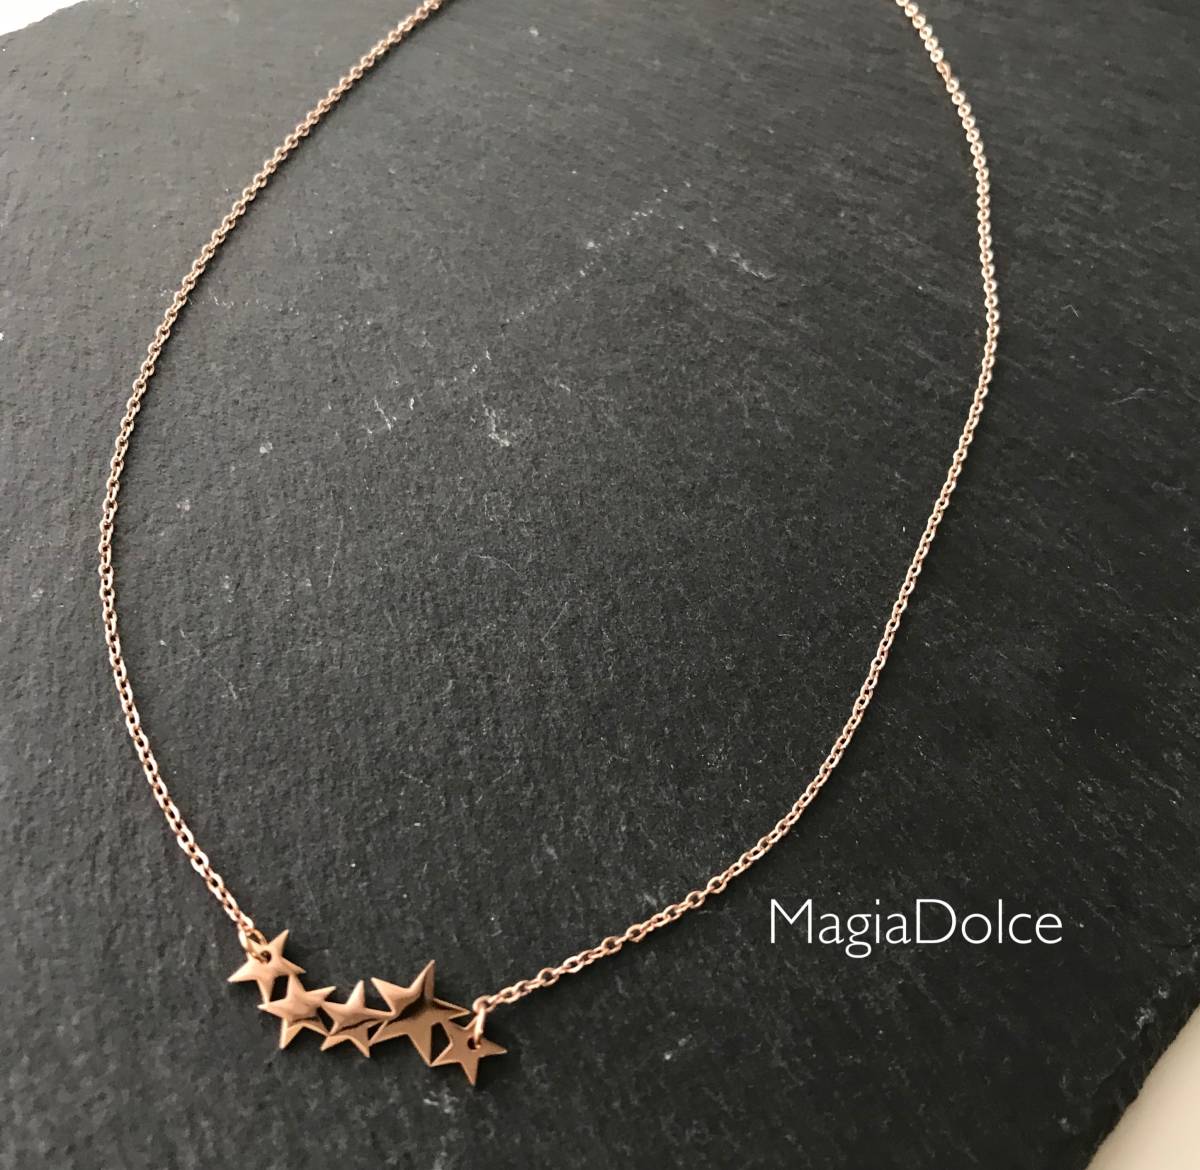  free shipping *MagiaDolce 5712* stainless steel necklace Gold necklace Star star necklace .. necklace allergy correspondence necklace 